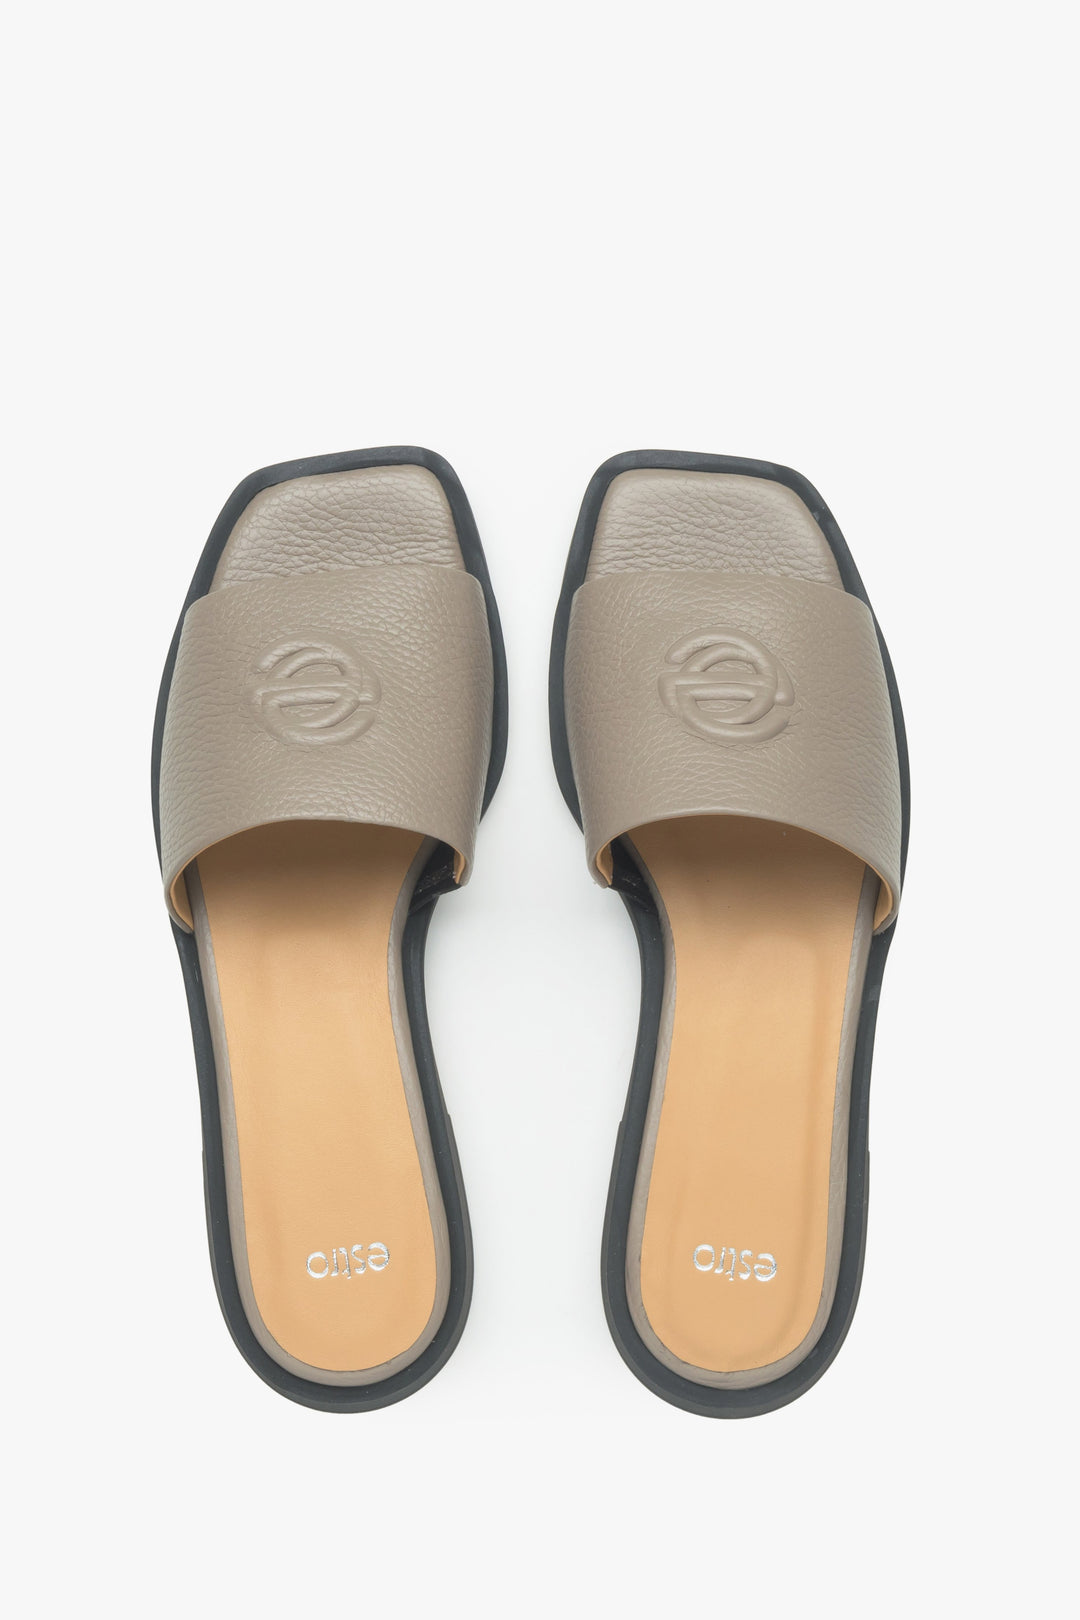 Women's grey leather flip-flops by Estro - top view presentation of the model.